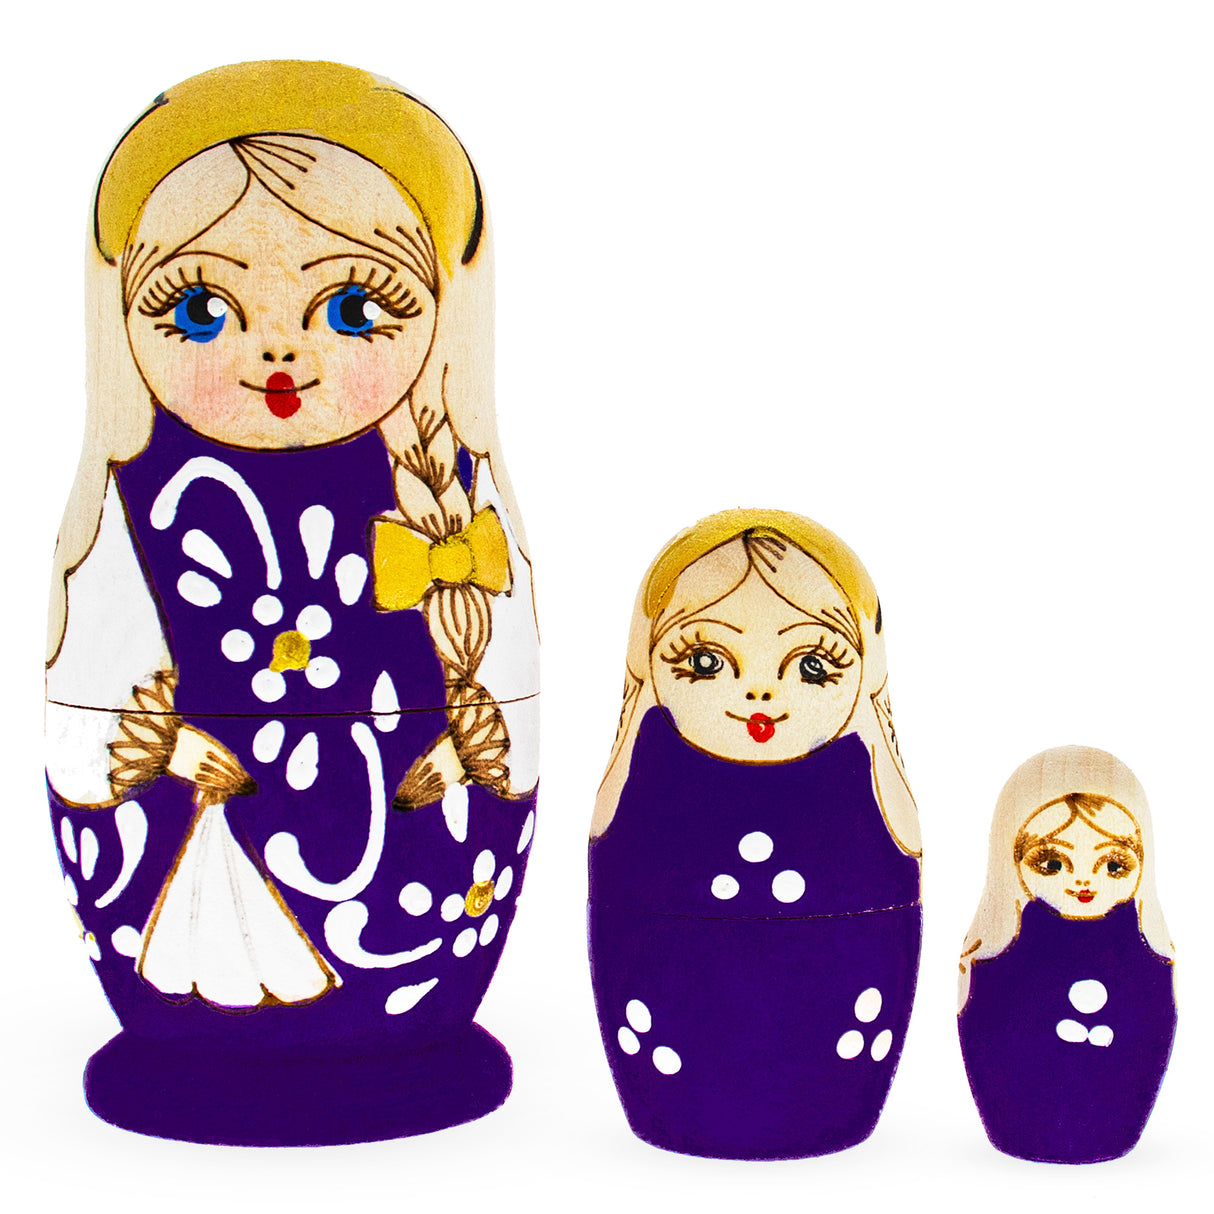 Set of 3 Purple Woodburning Style Wooden Nesting Dolls in Purple color,  shape